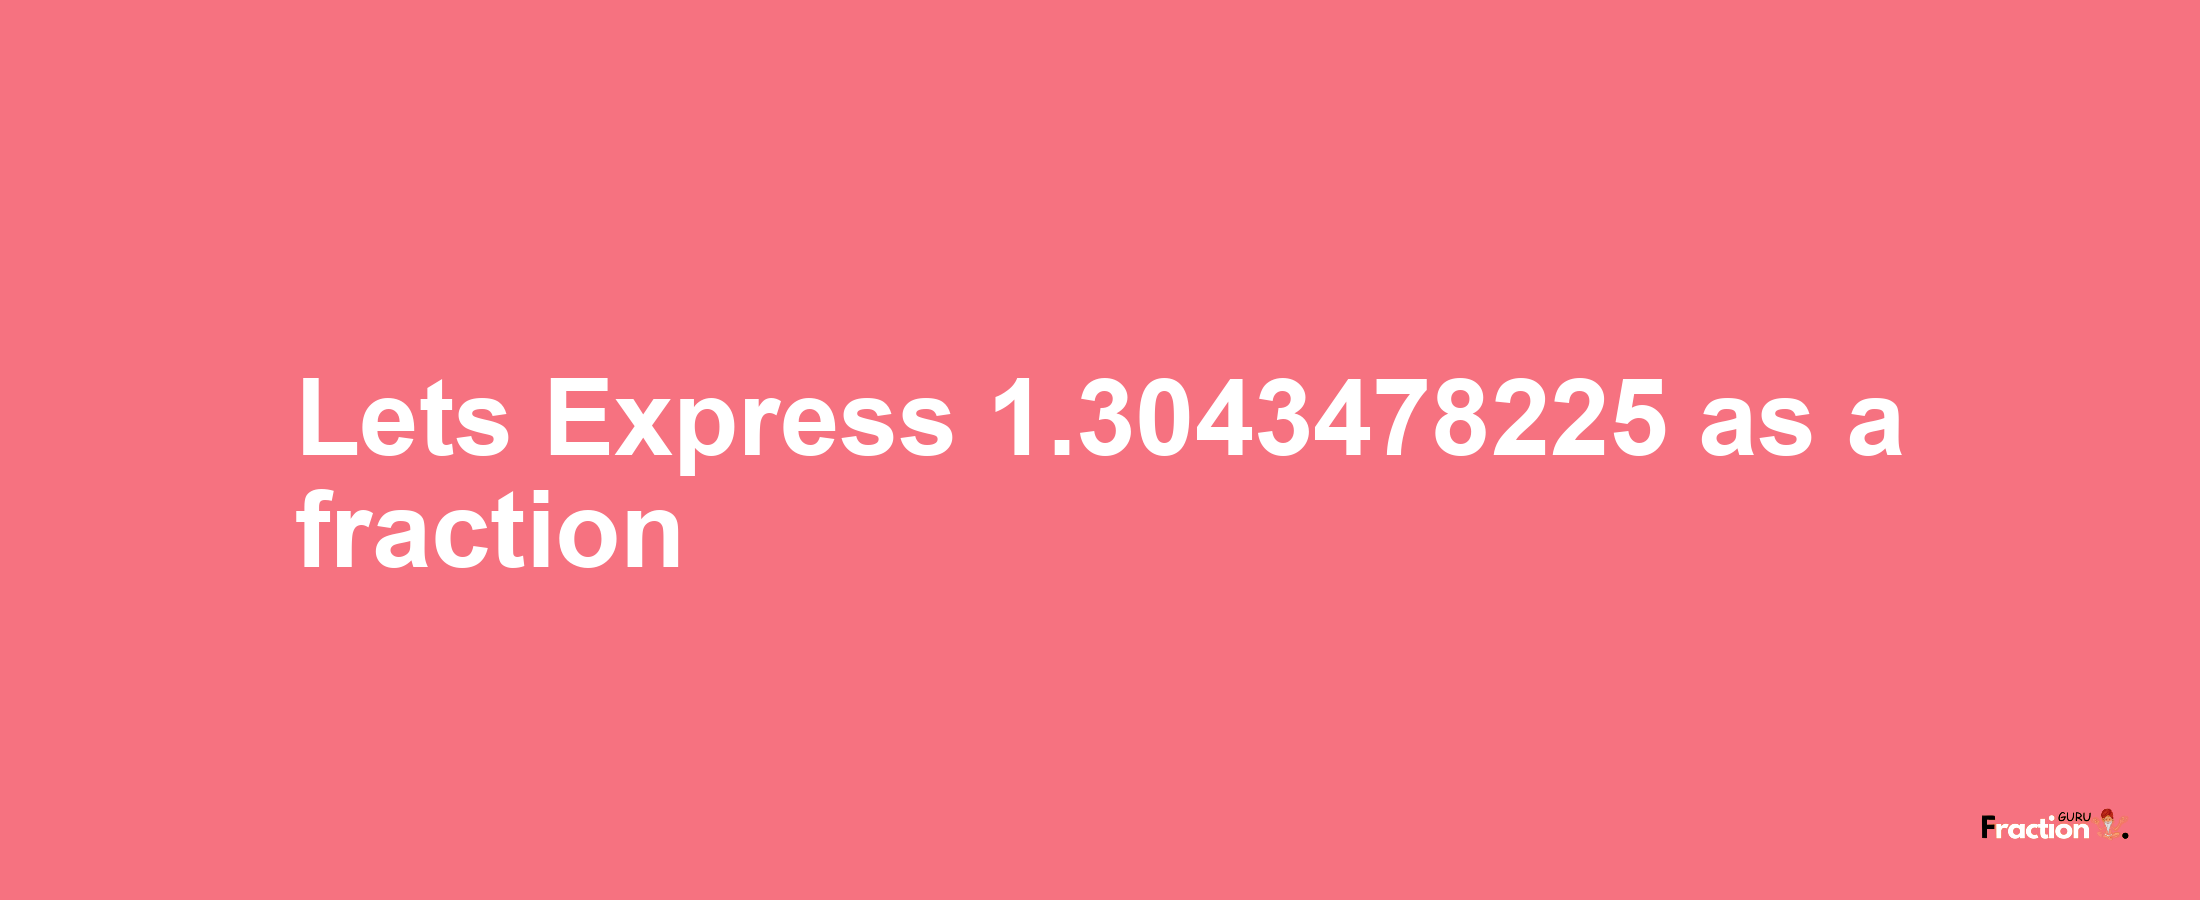 Lets Express 1.3043478225 as afraction